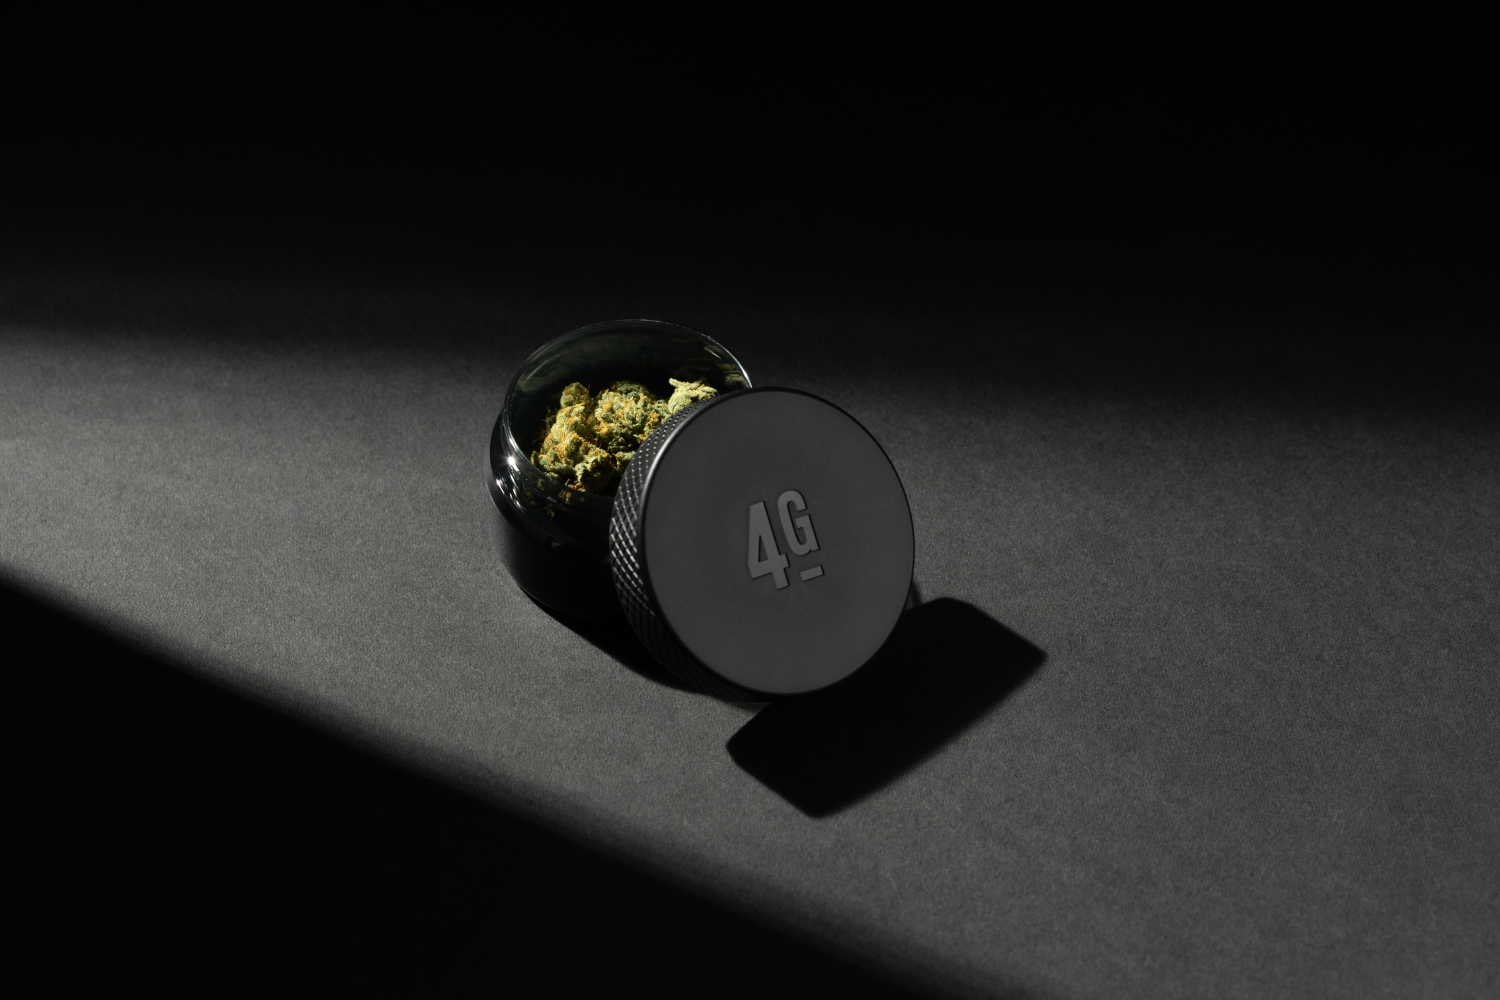 The 4G Flower from Monogram, Jay-Z's cannabis brand